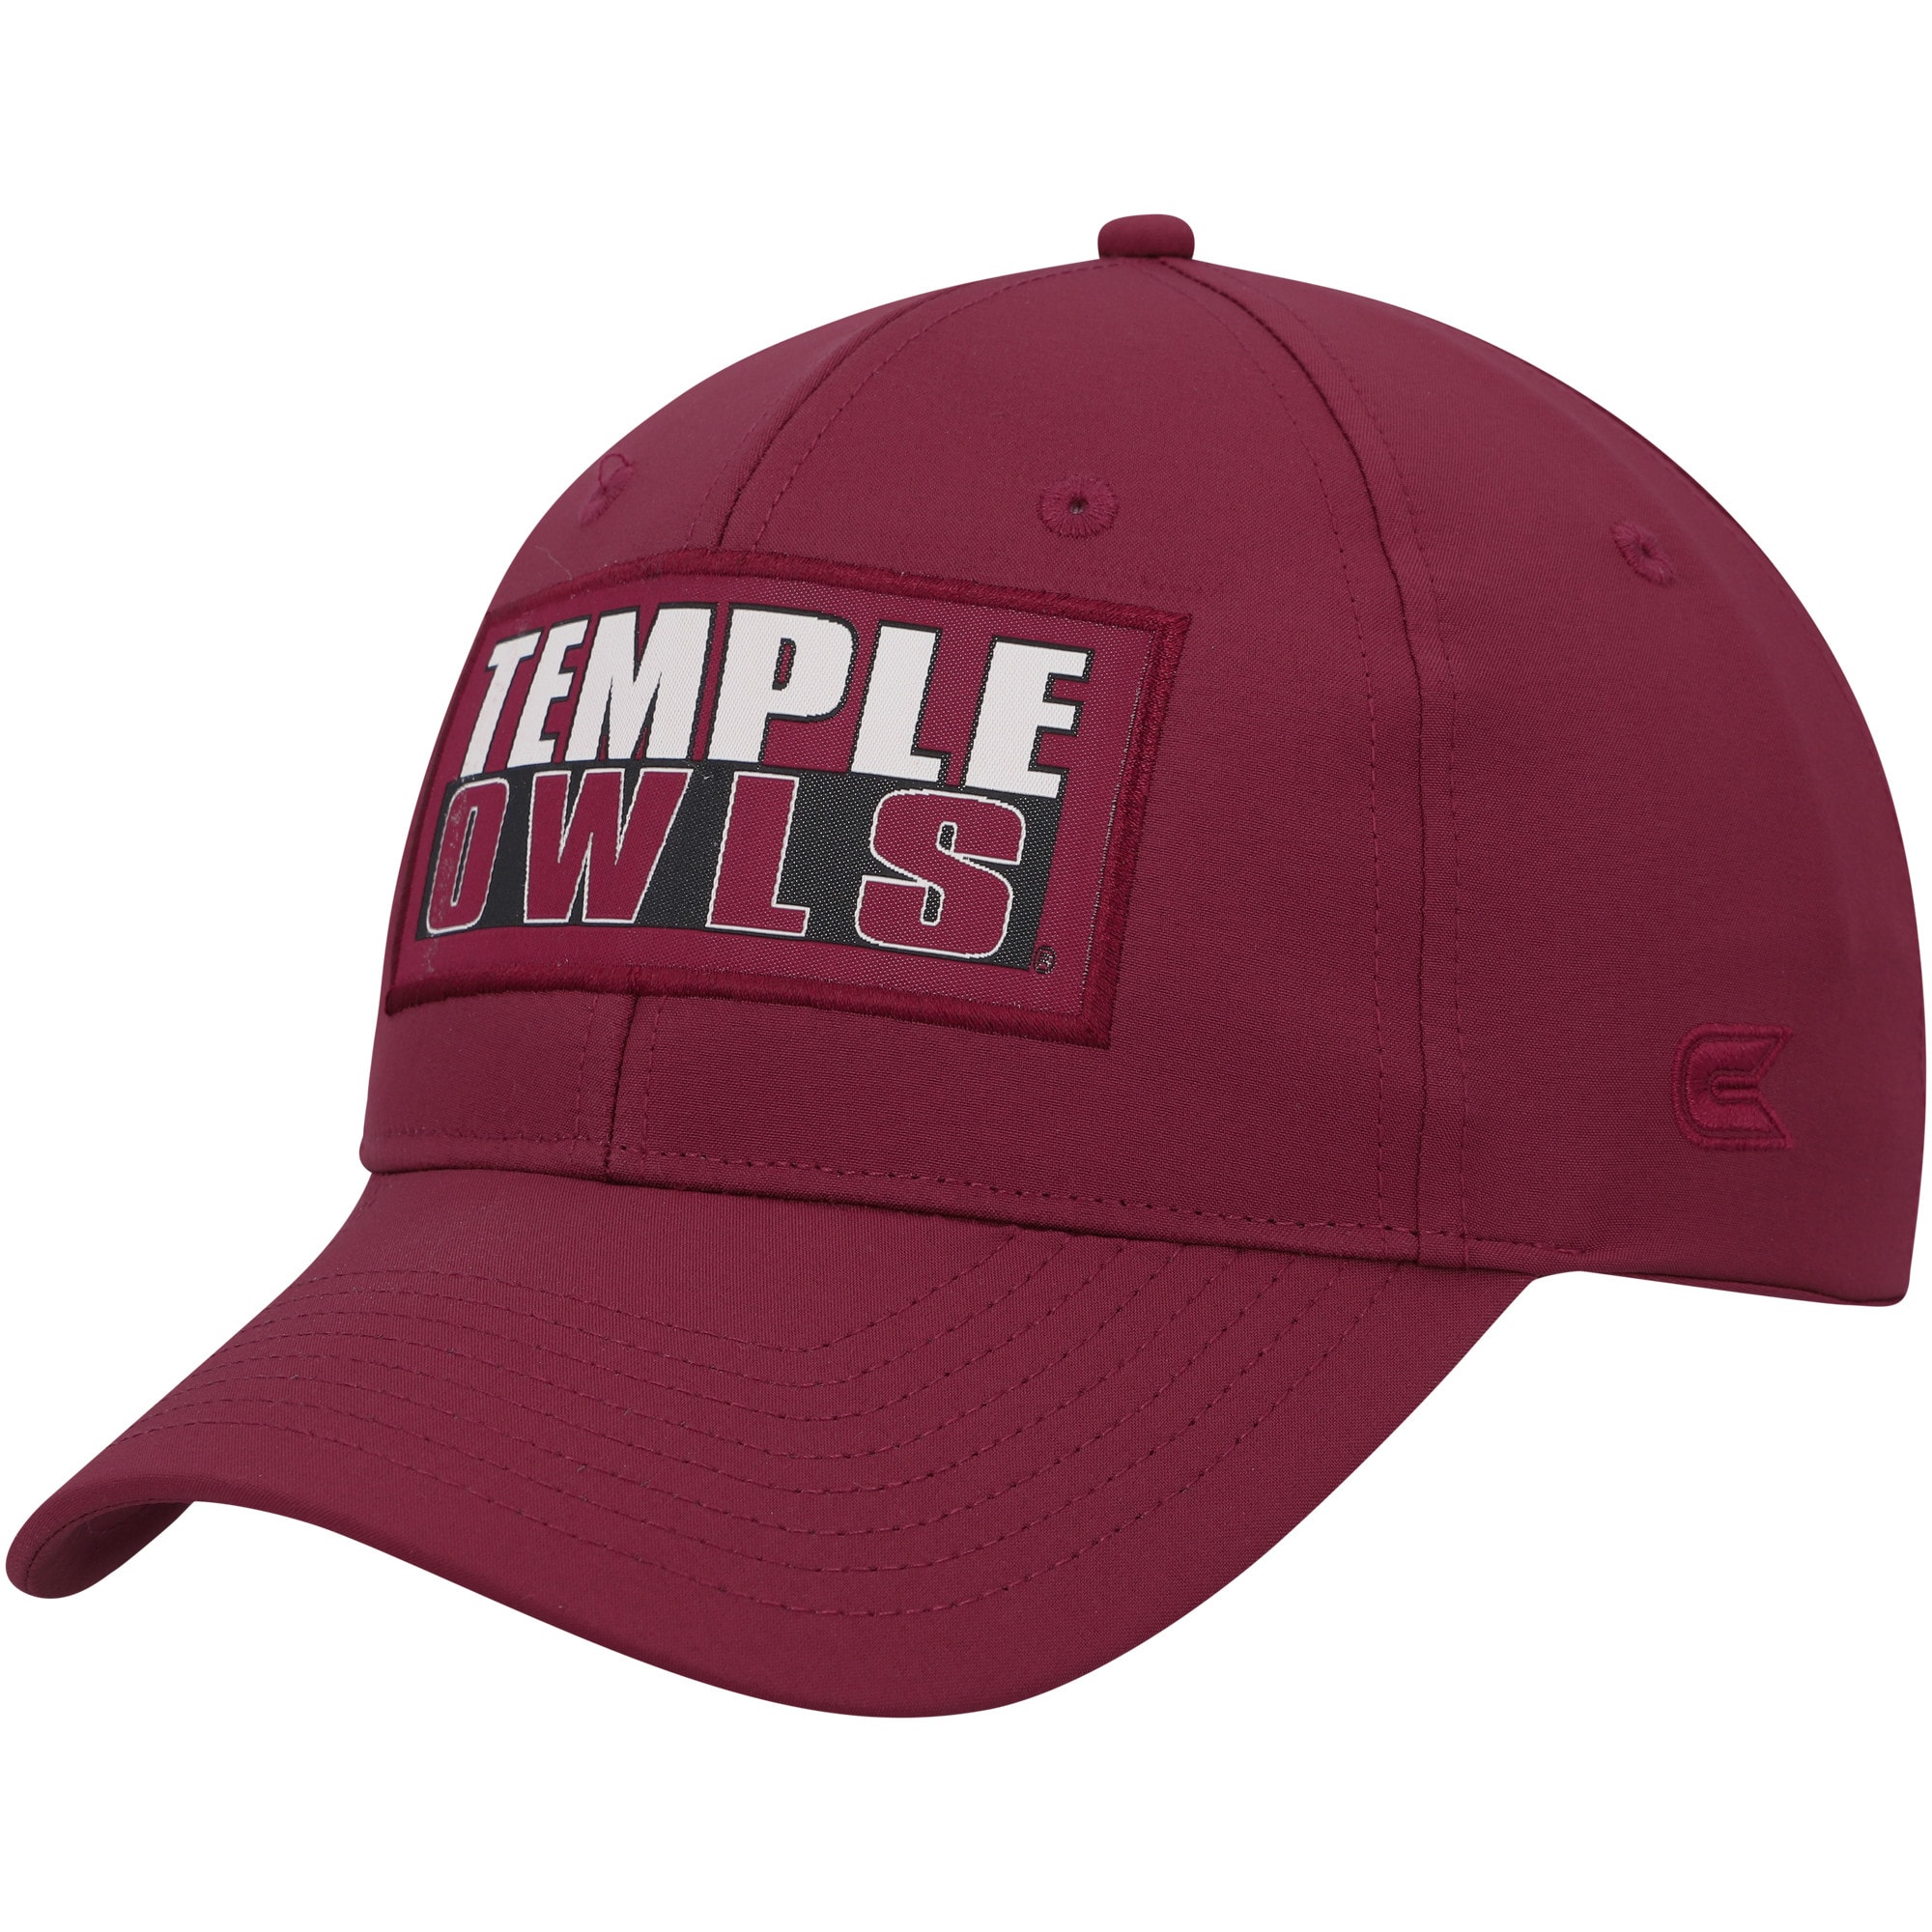 Men's Colosseum Cherry Temple Owls Positraction Snapback Hat - OSFA - image 1 of 4